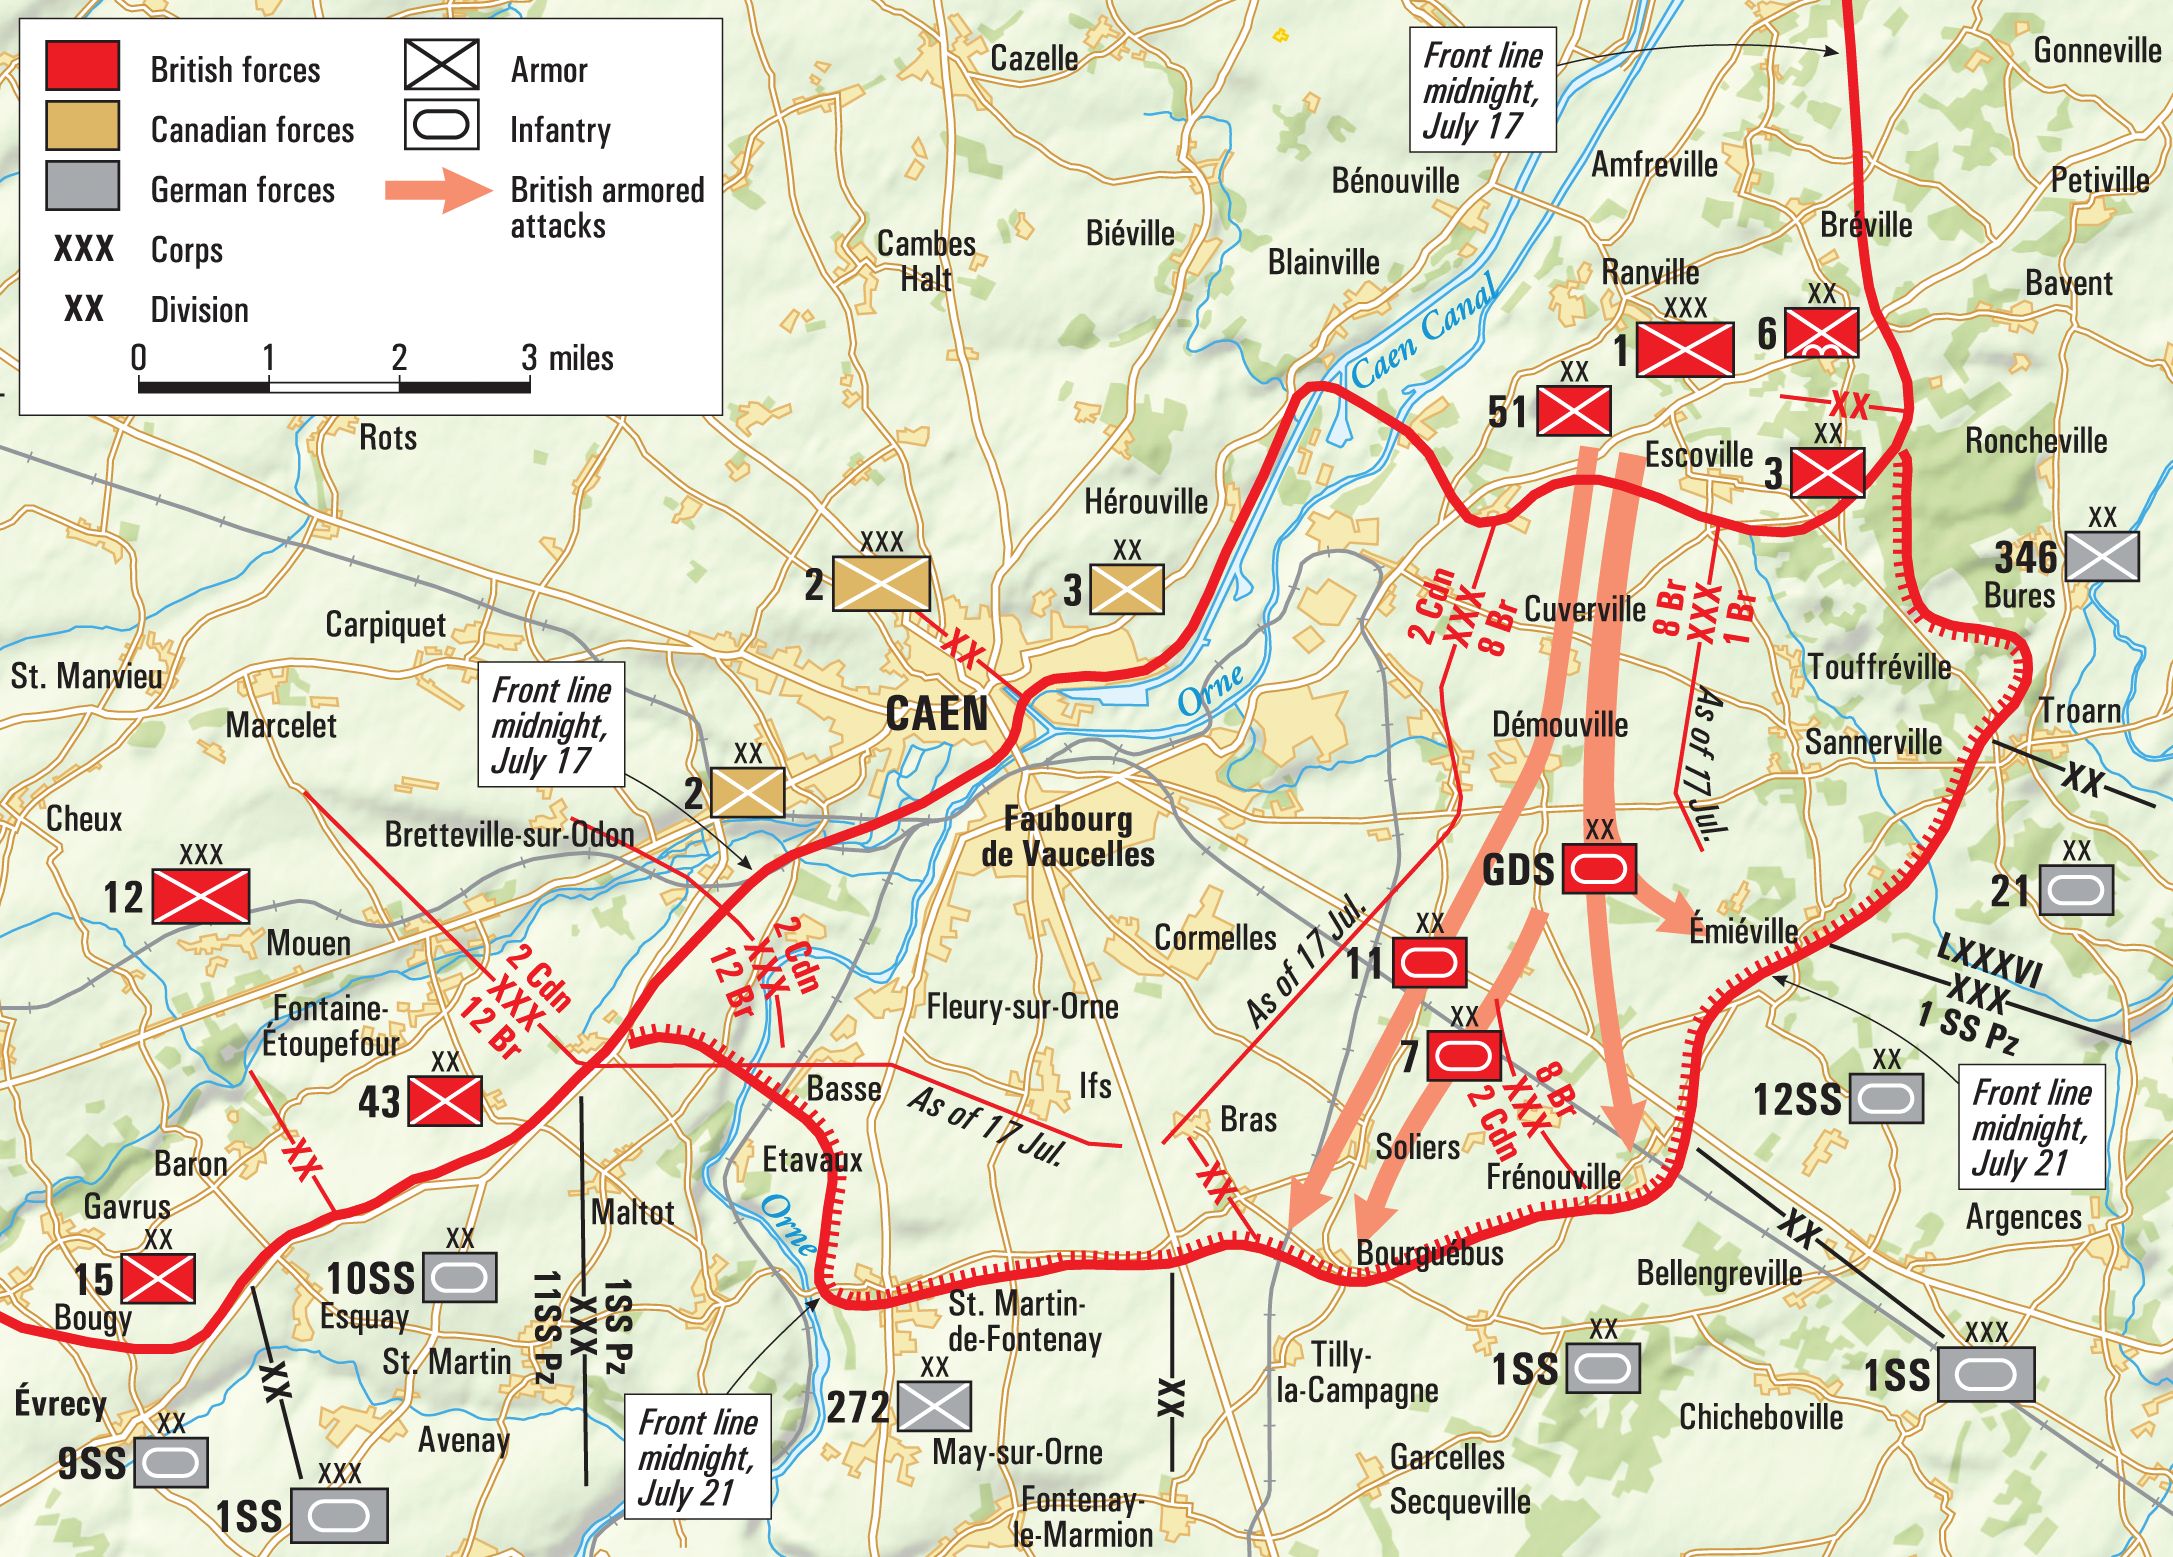 Map shows the fighting that raged around Bourguebus Ridge, high ground in the vicinity of Caen, during the Normandy campaign, particularly from July 18-21, 1944, as the Germans stubbornly clung to the tactically vital area.